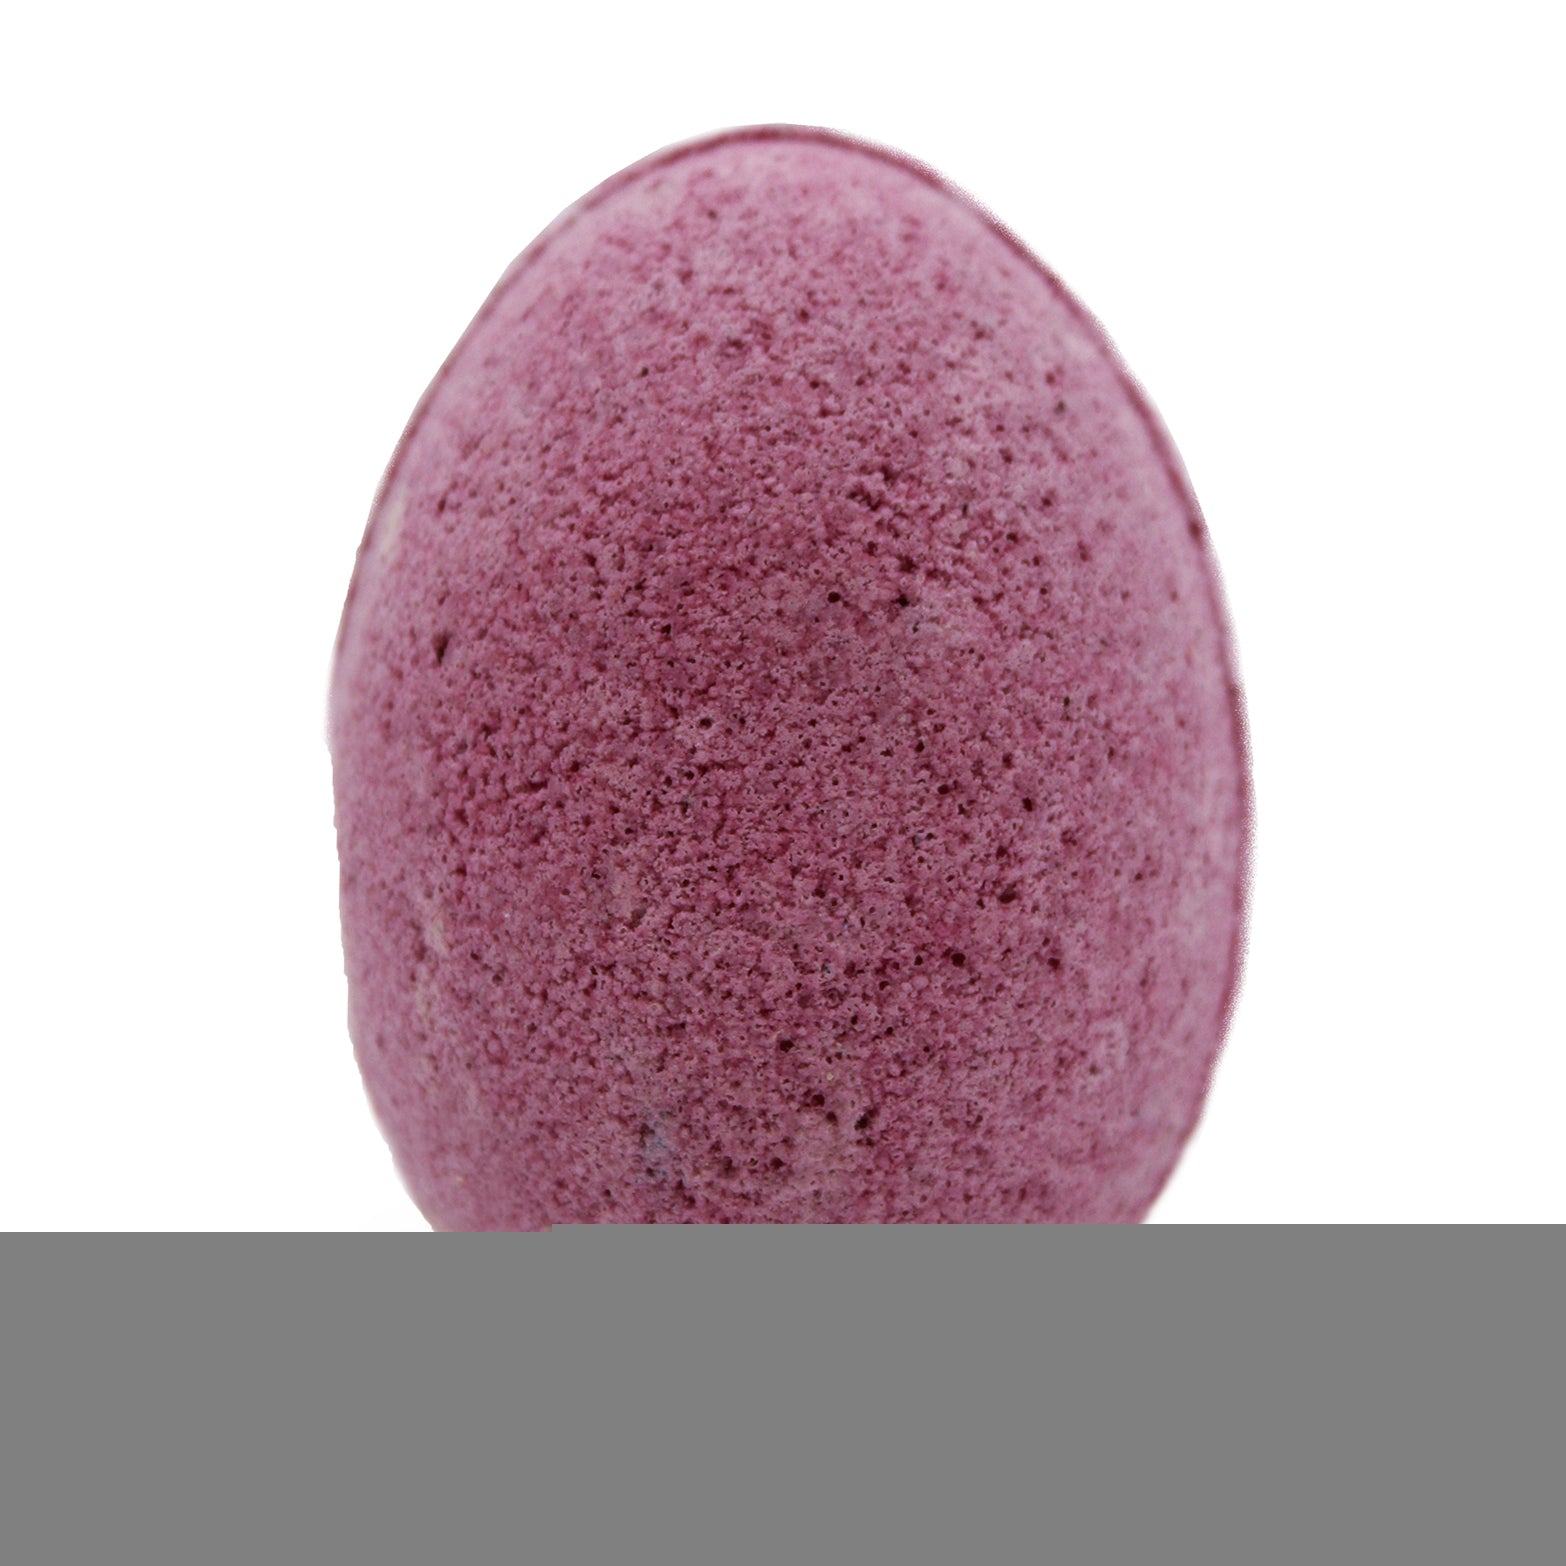 View Pack of 6 Bath Eggs Cherry information